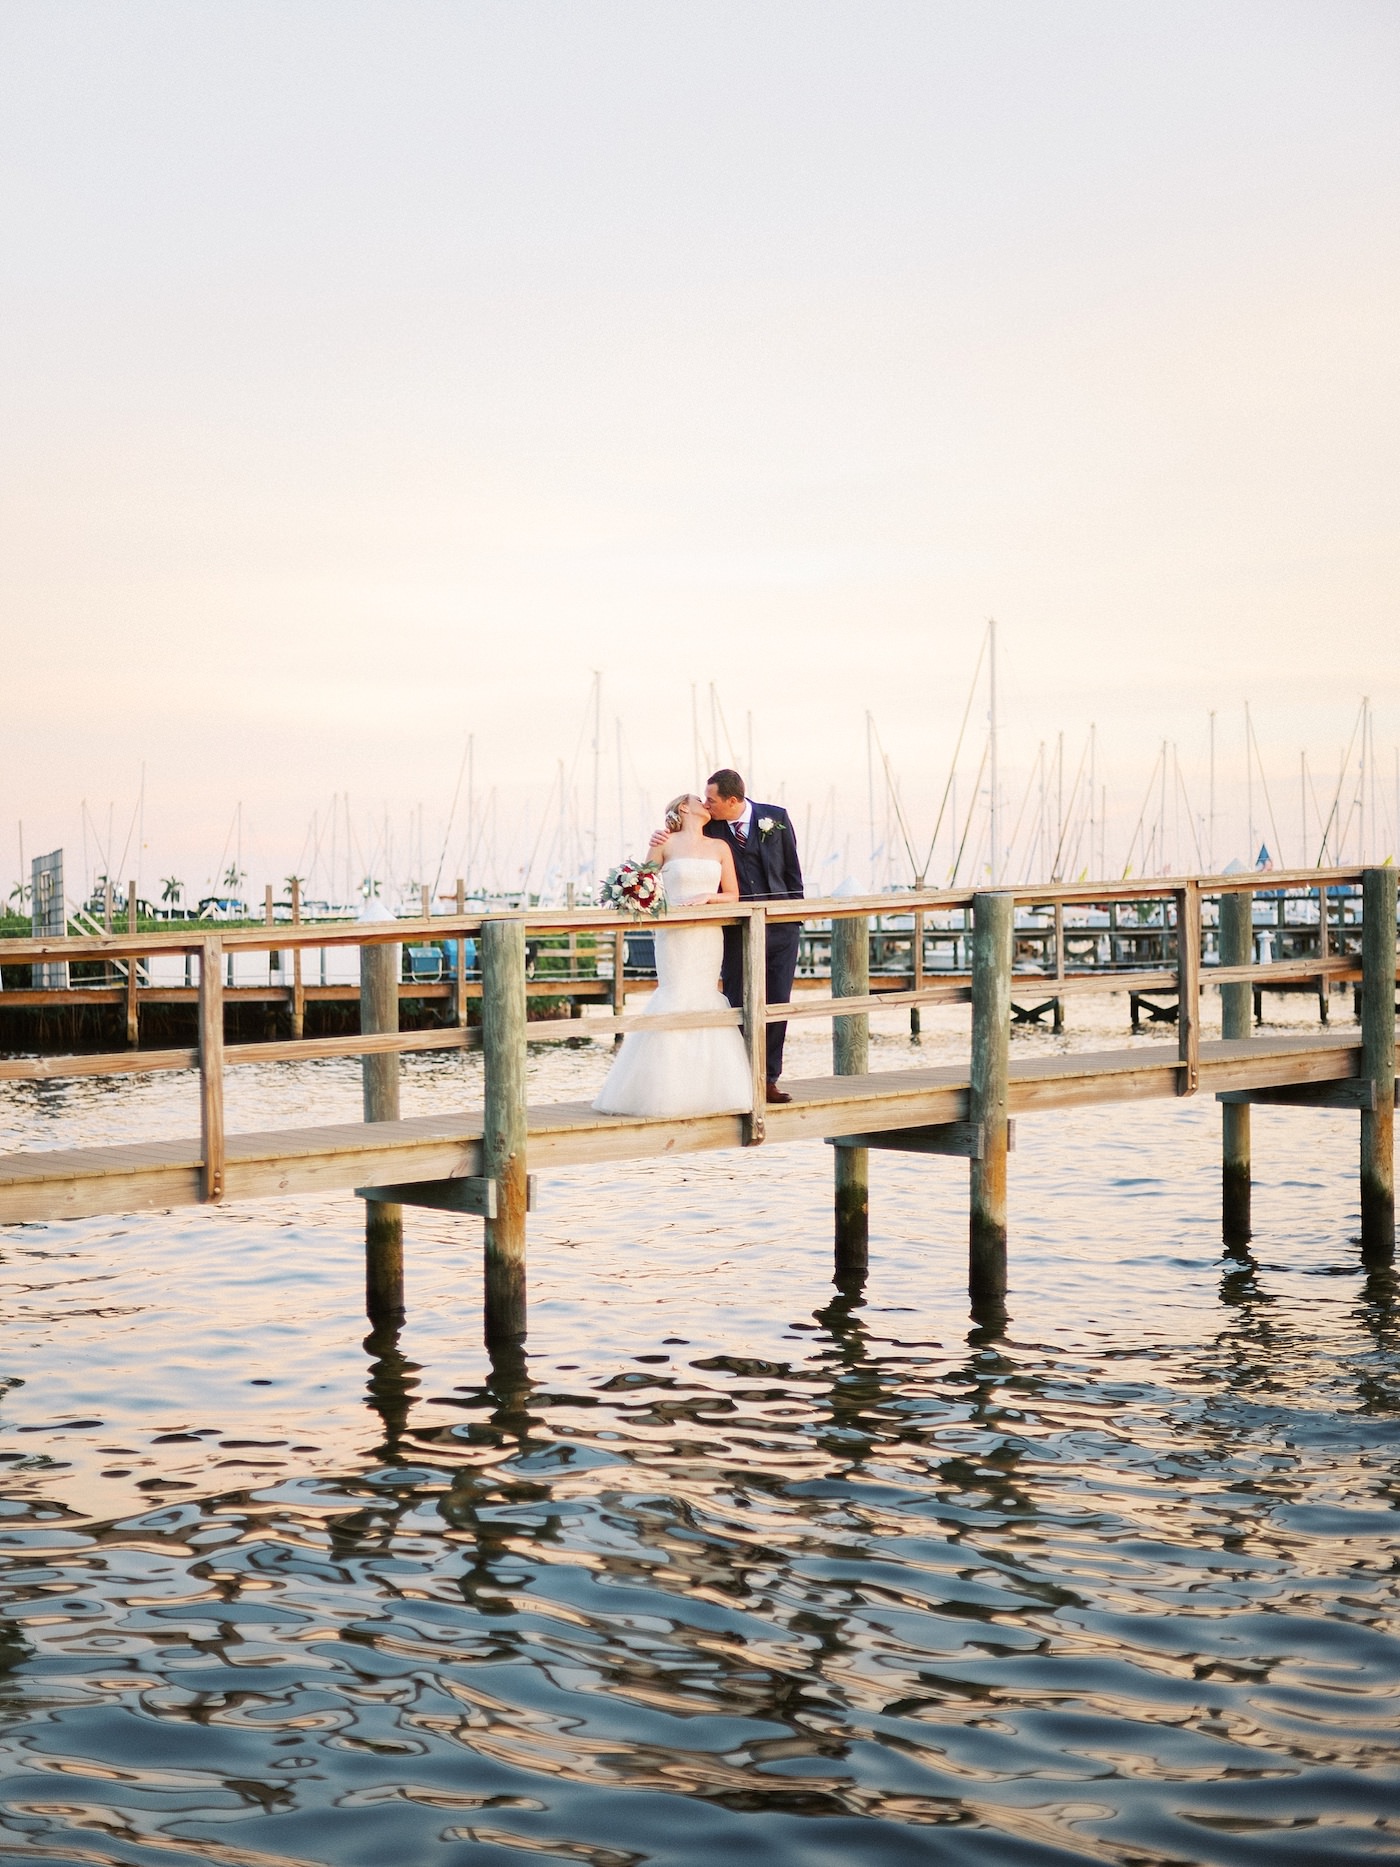 Bride and Groom Outdoor Dock Portrait | Florida Fall Autumn Waterfront Wedding | Bride and Groom Sunset Portrait